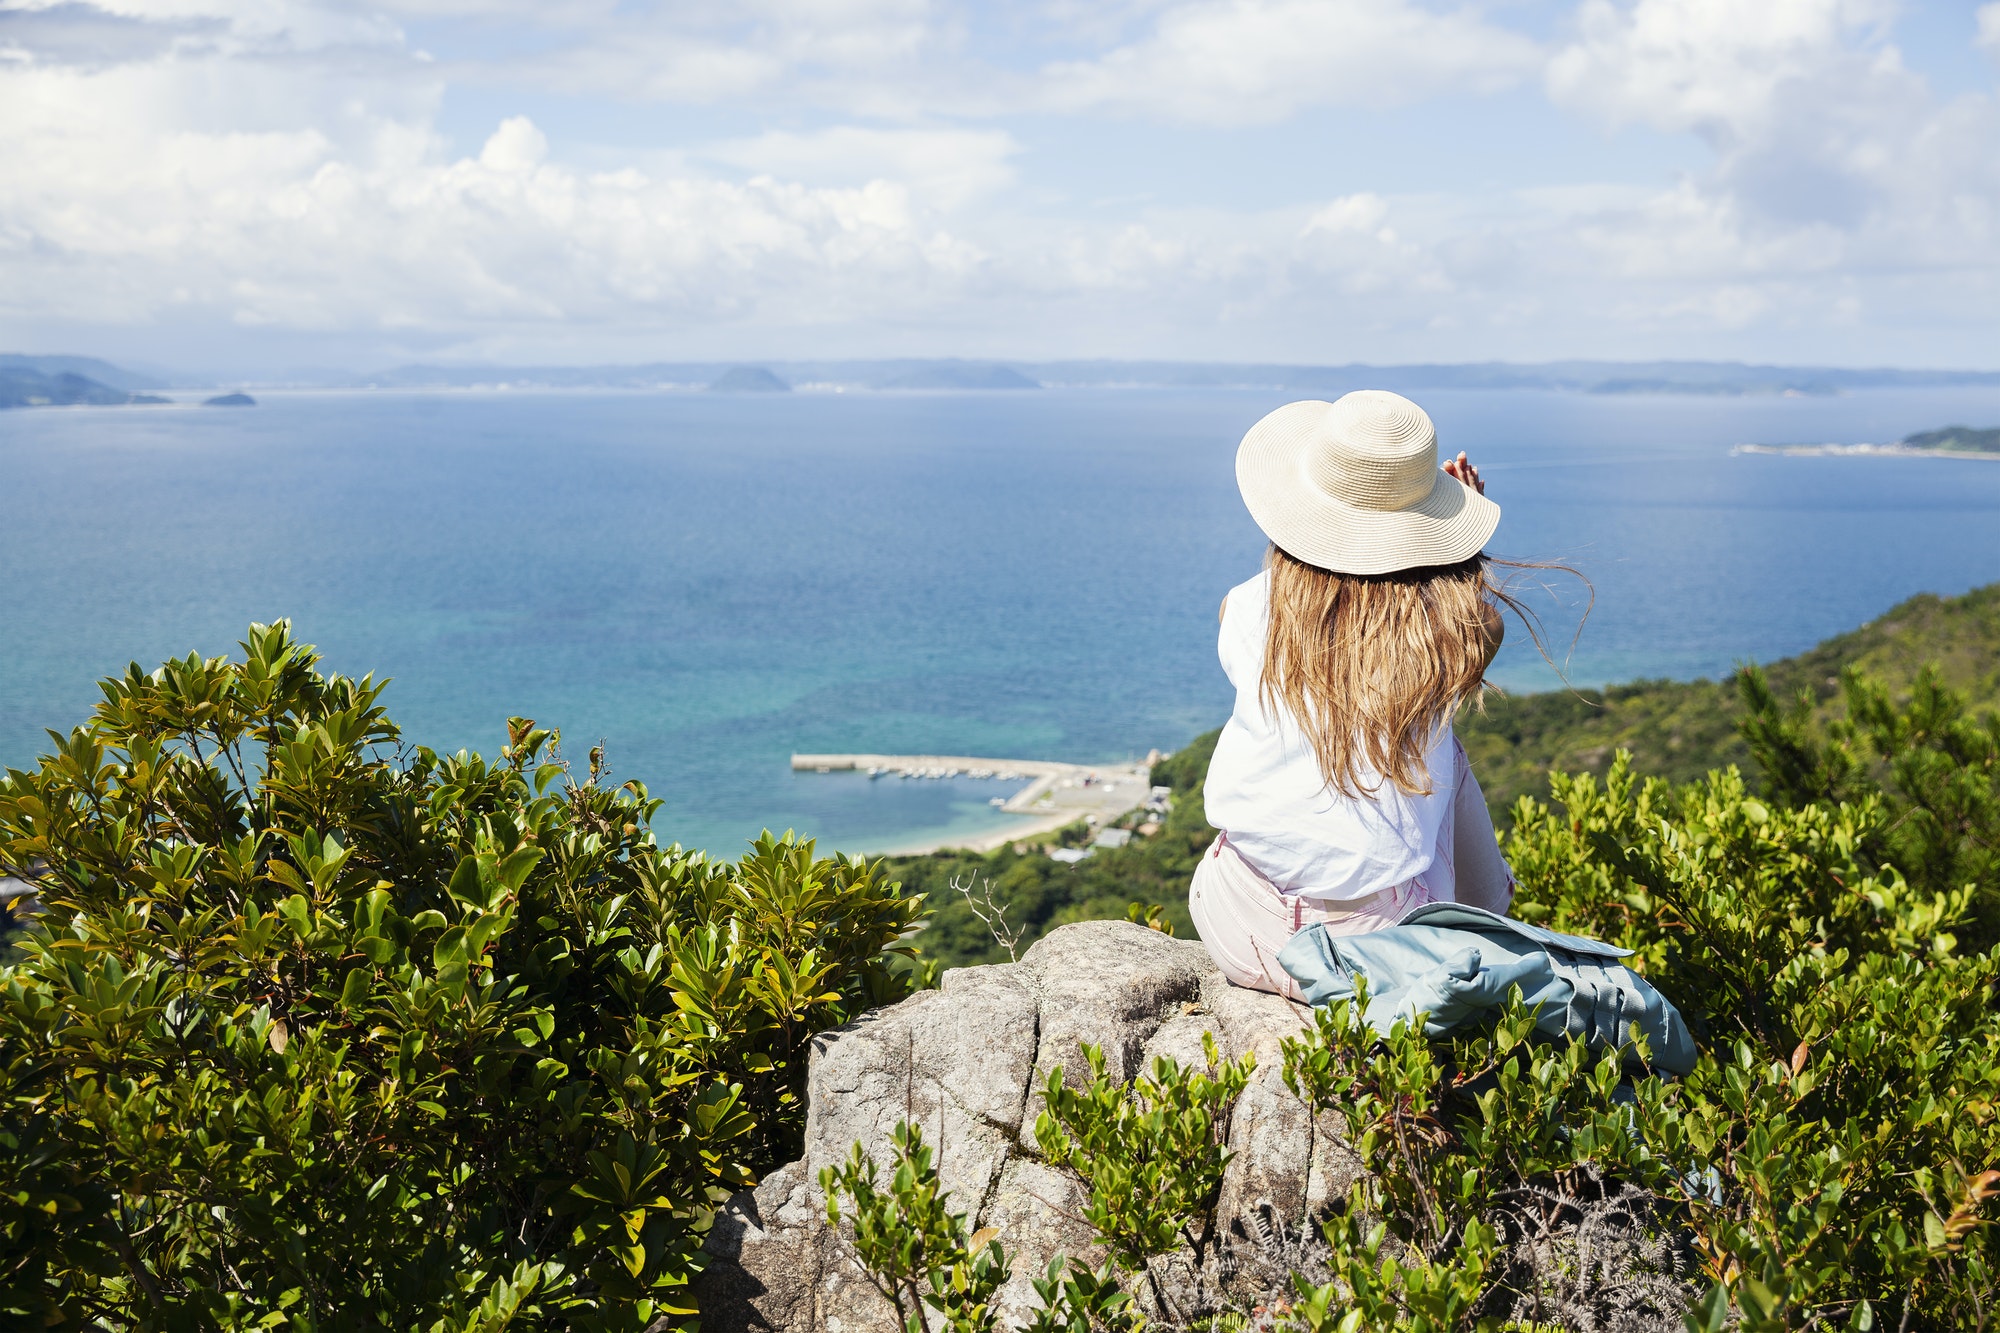 Japanese woman wearing hat sitting on rock on a cliff, ocean in the background.